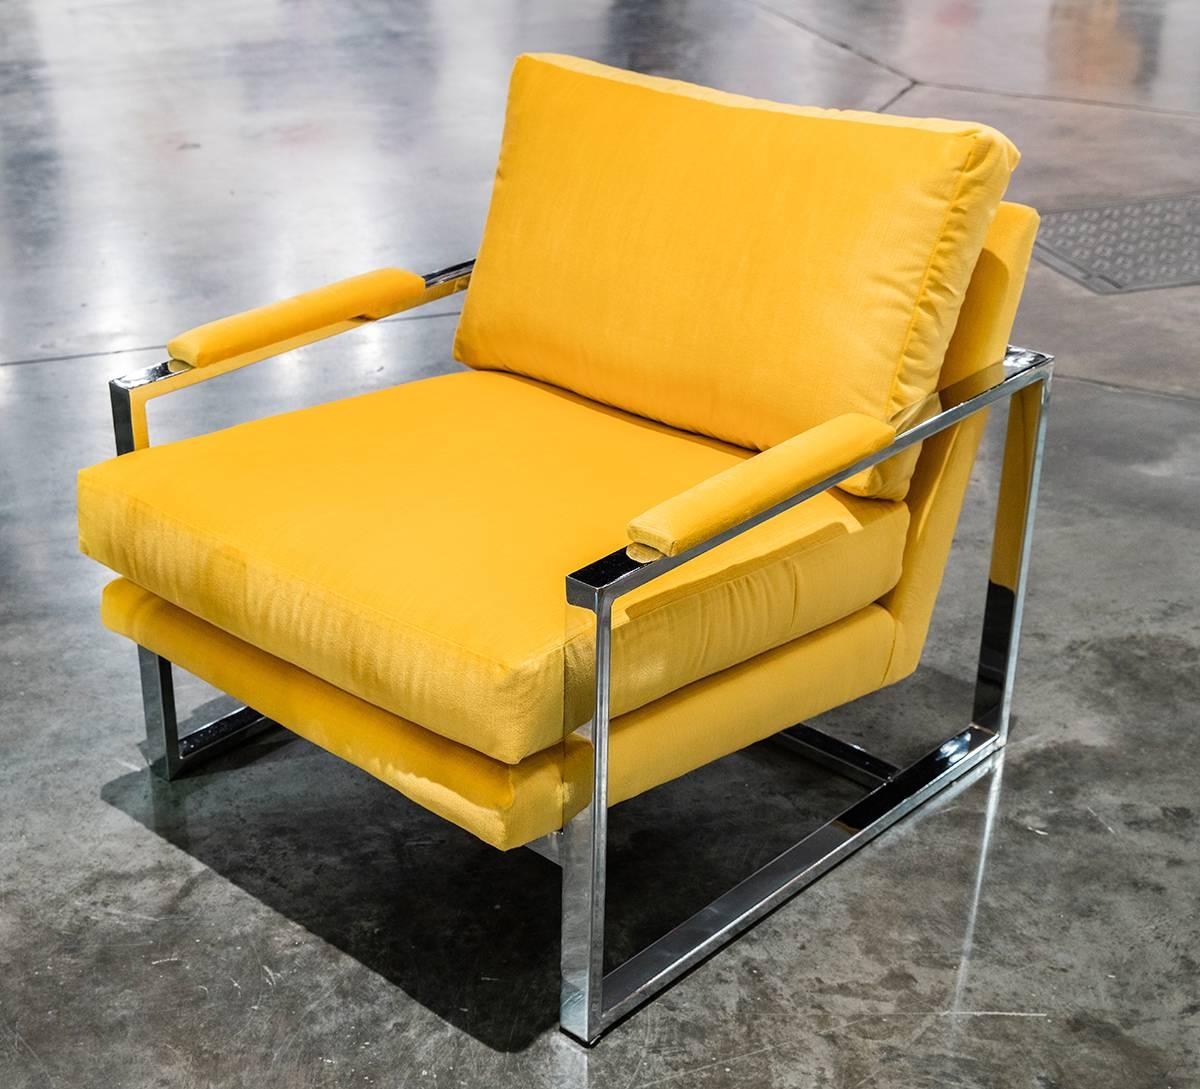 Vintage Milo Baughman armchair in new vibrant yellow upholstery.